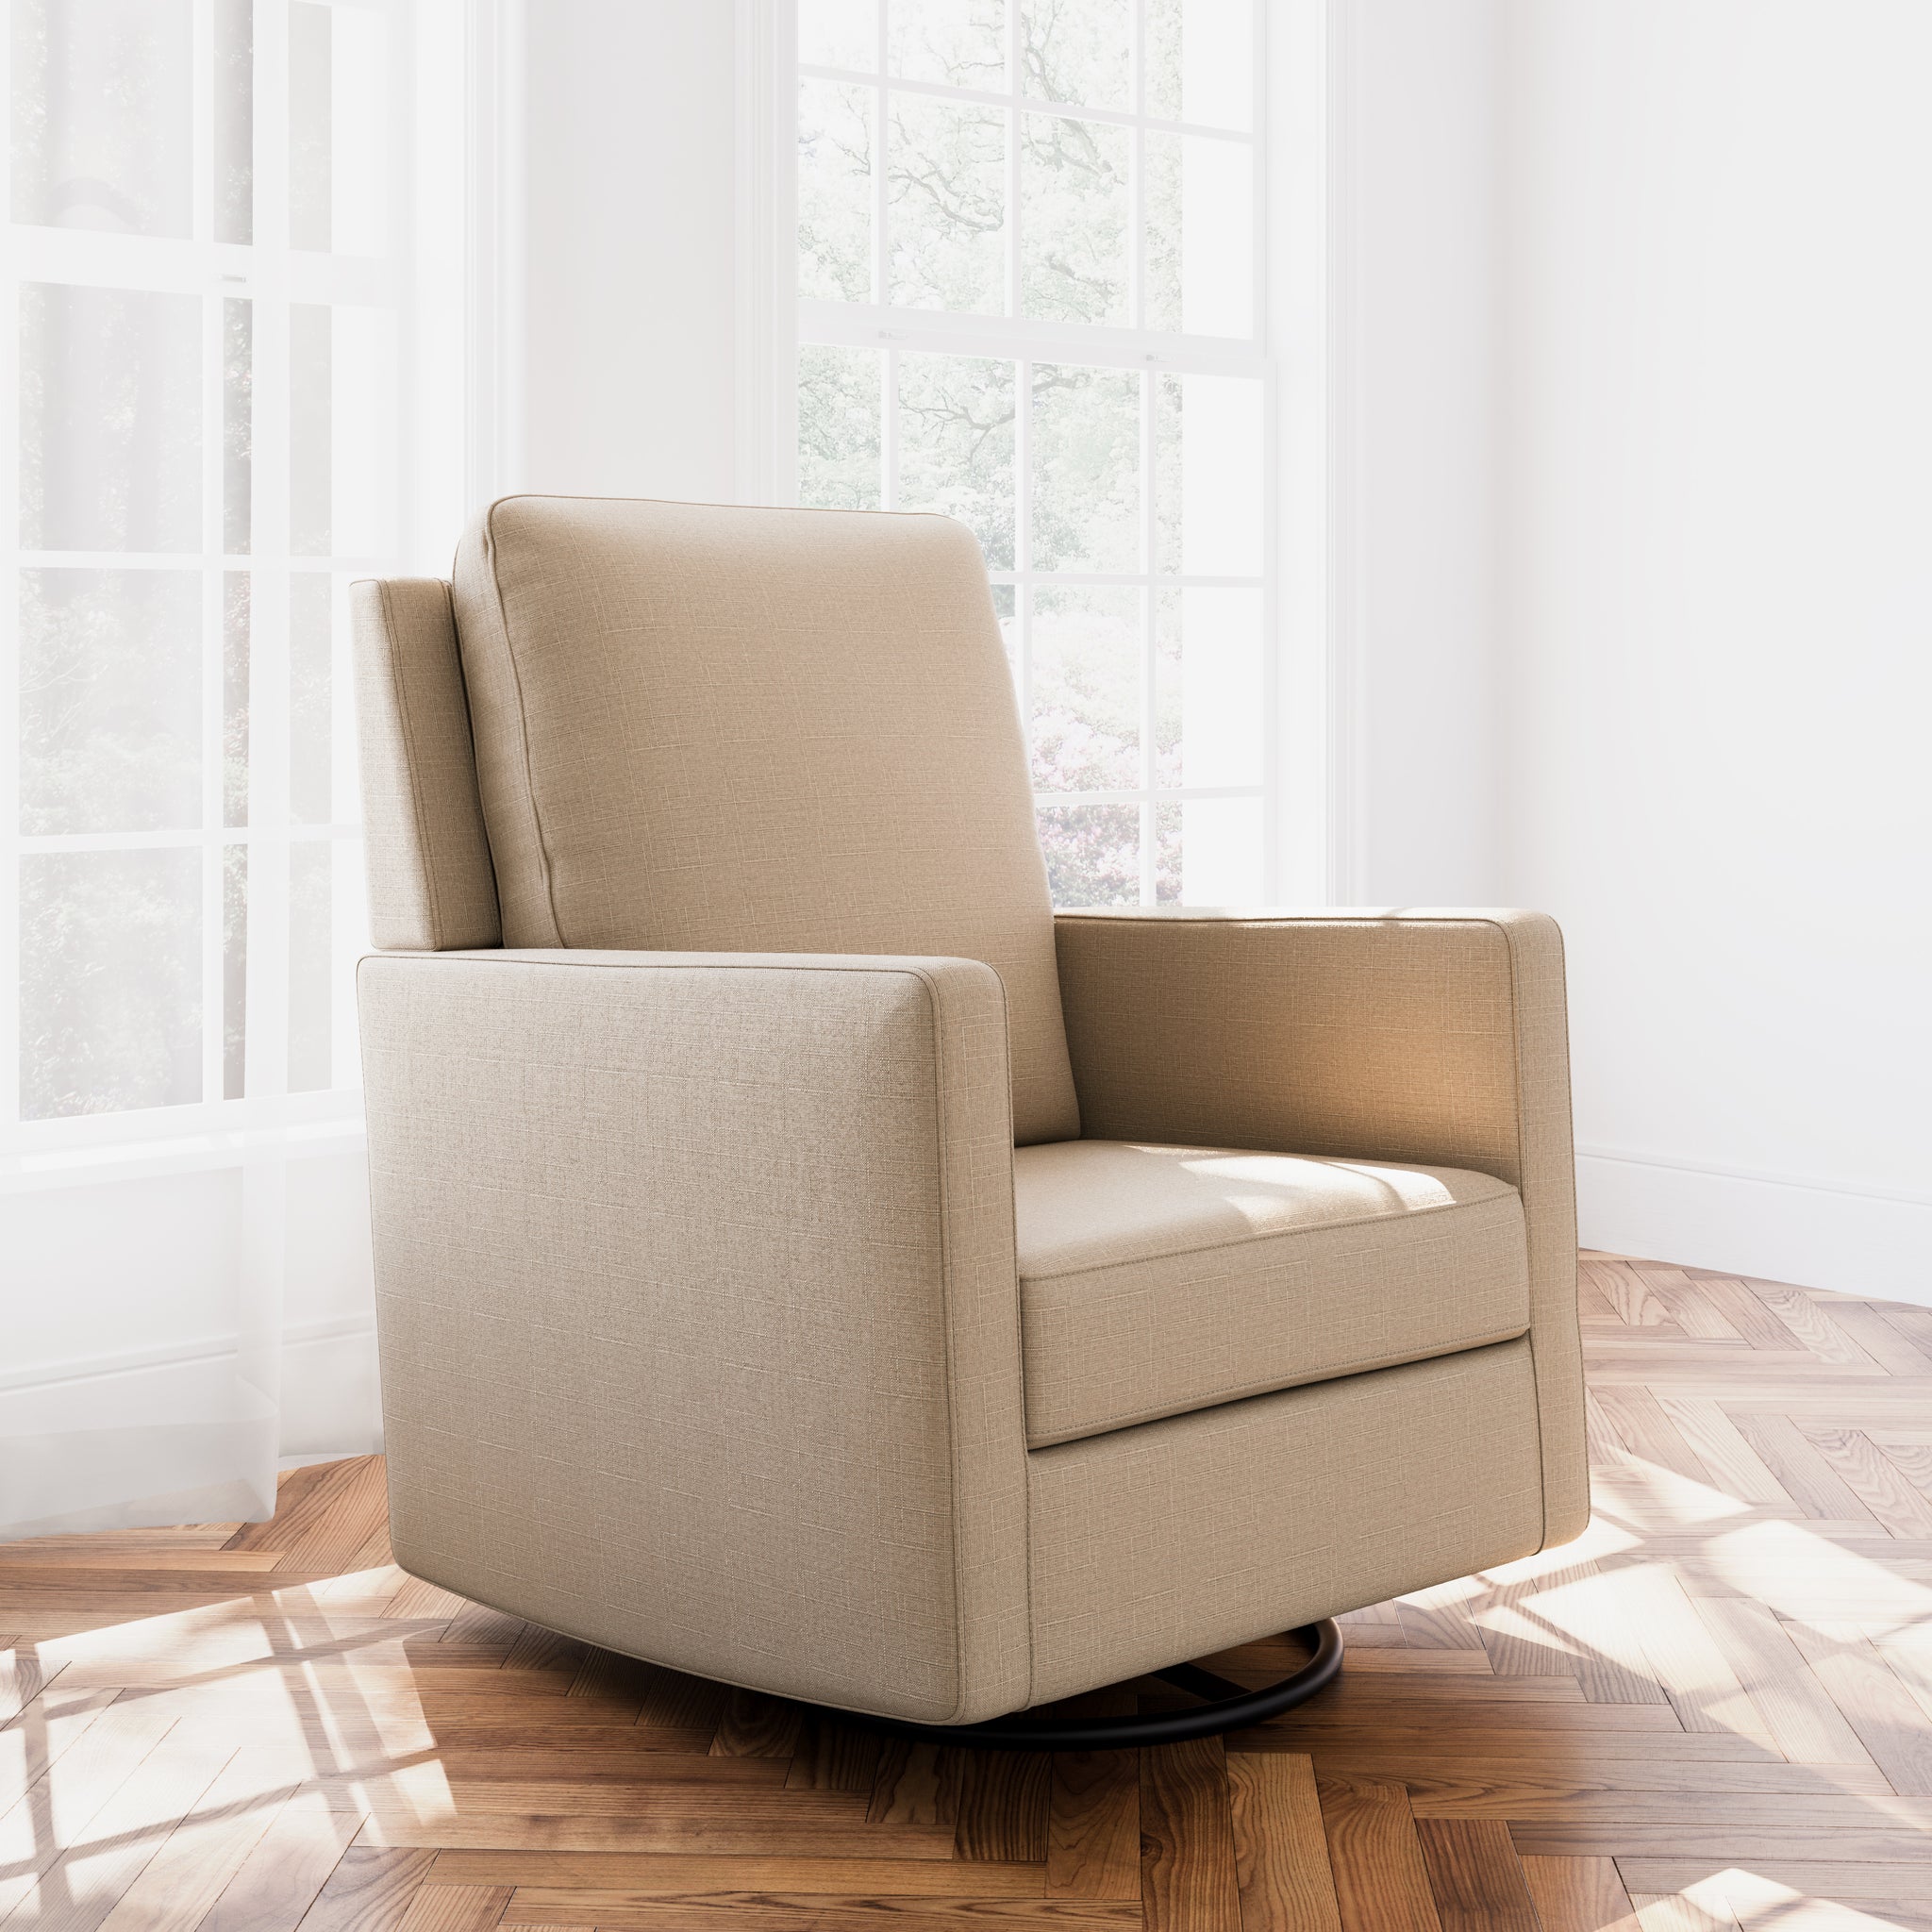 Swivel glider with latte fabric in a room